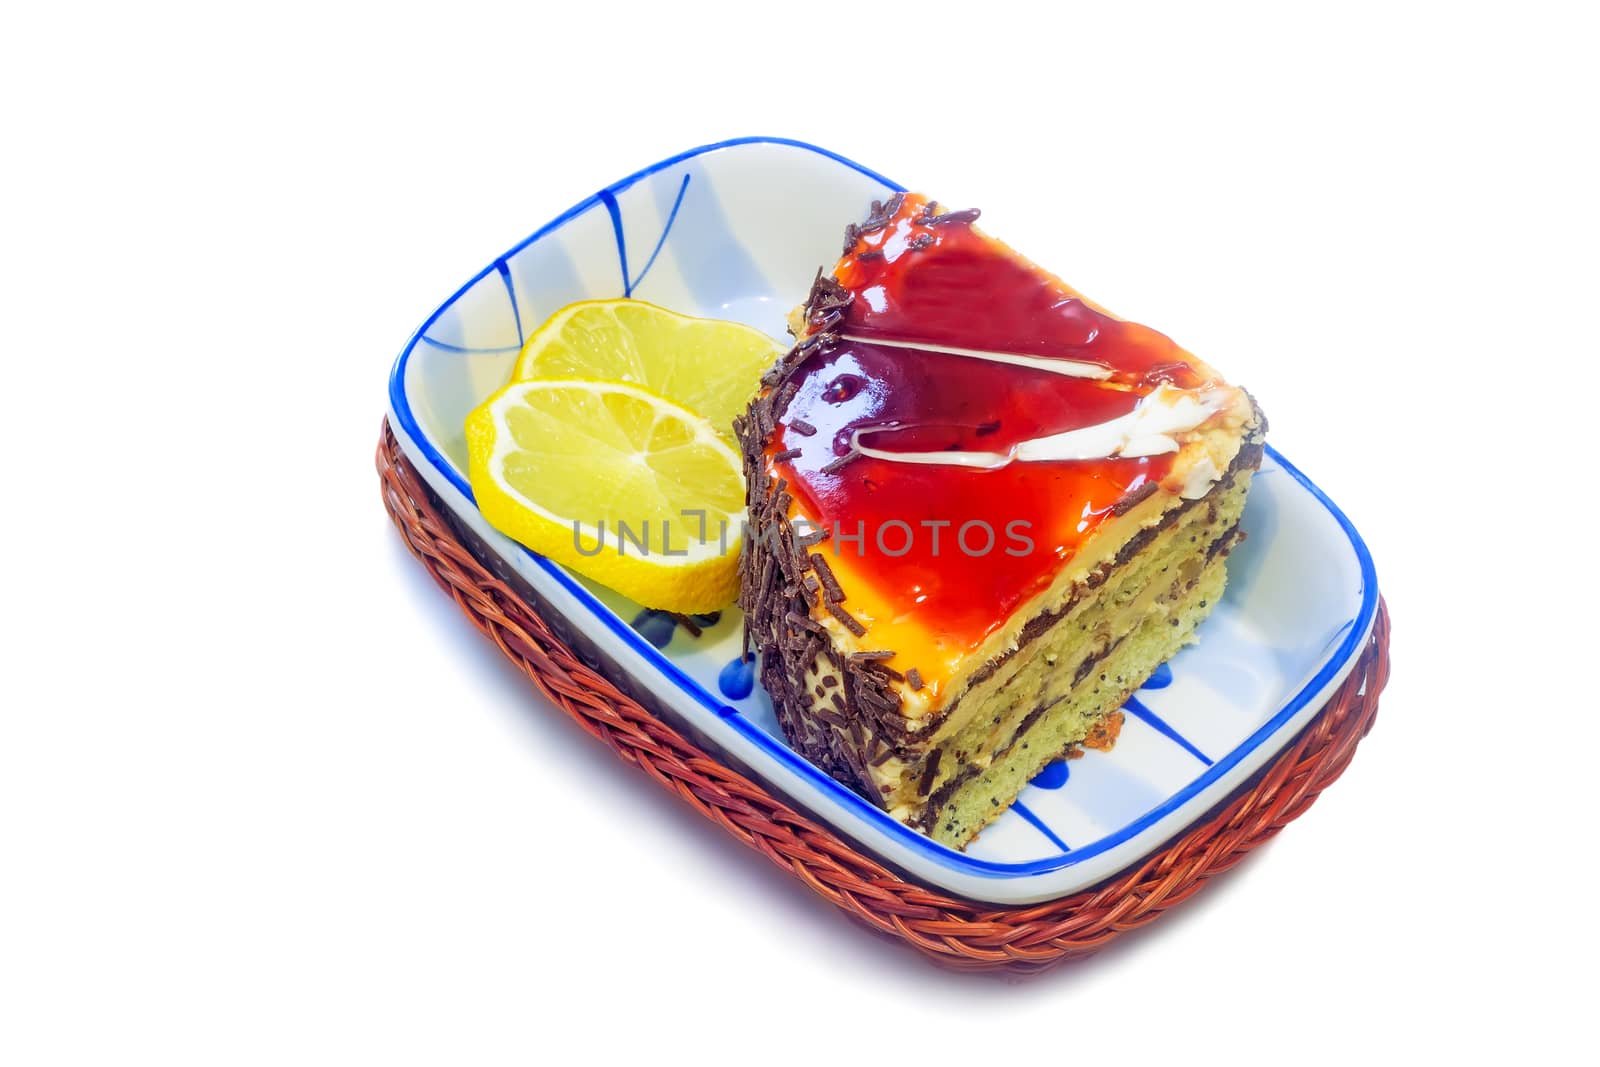 Cake and slices of lemon on a white background. by georgina198